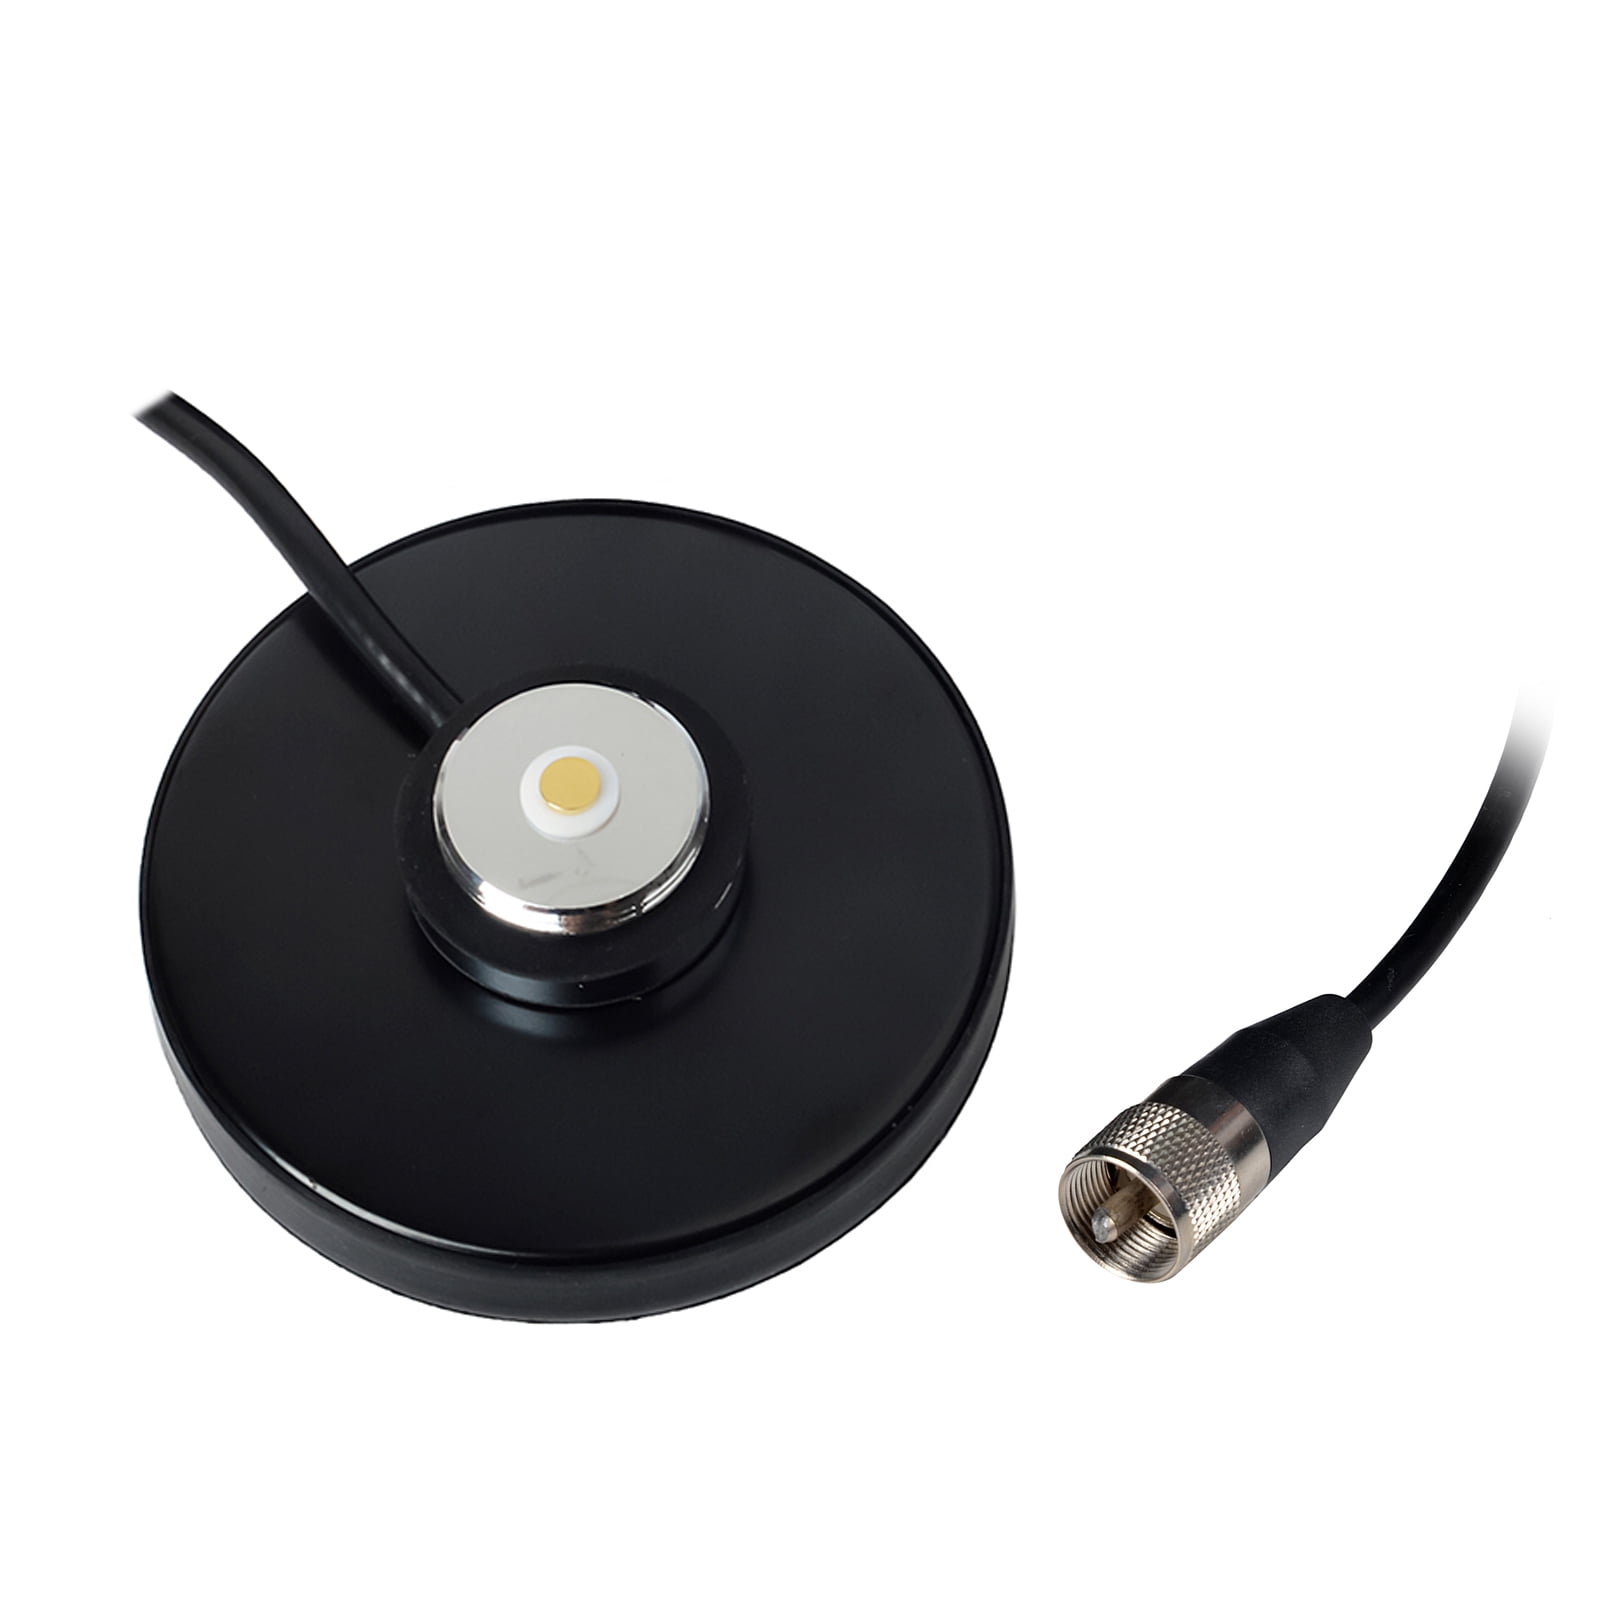 NMO Mount Magnetic base for Car Bus Taxi Mobile Radio Antenna W/5M Cable